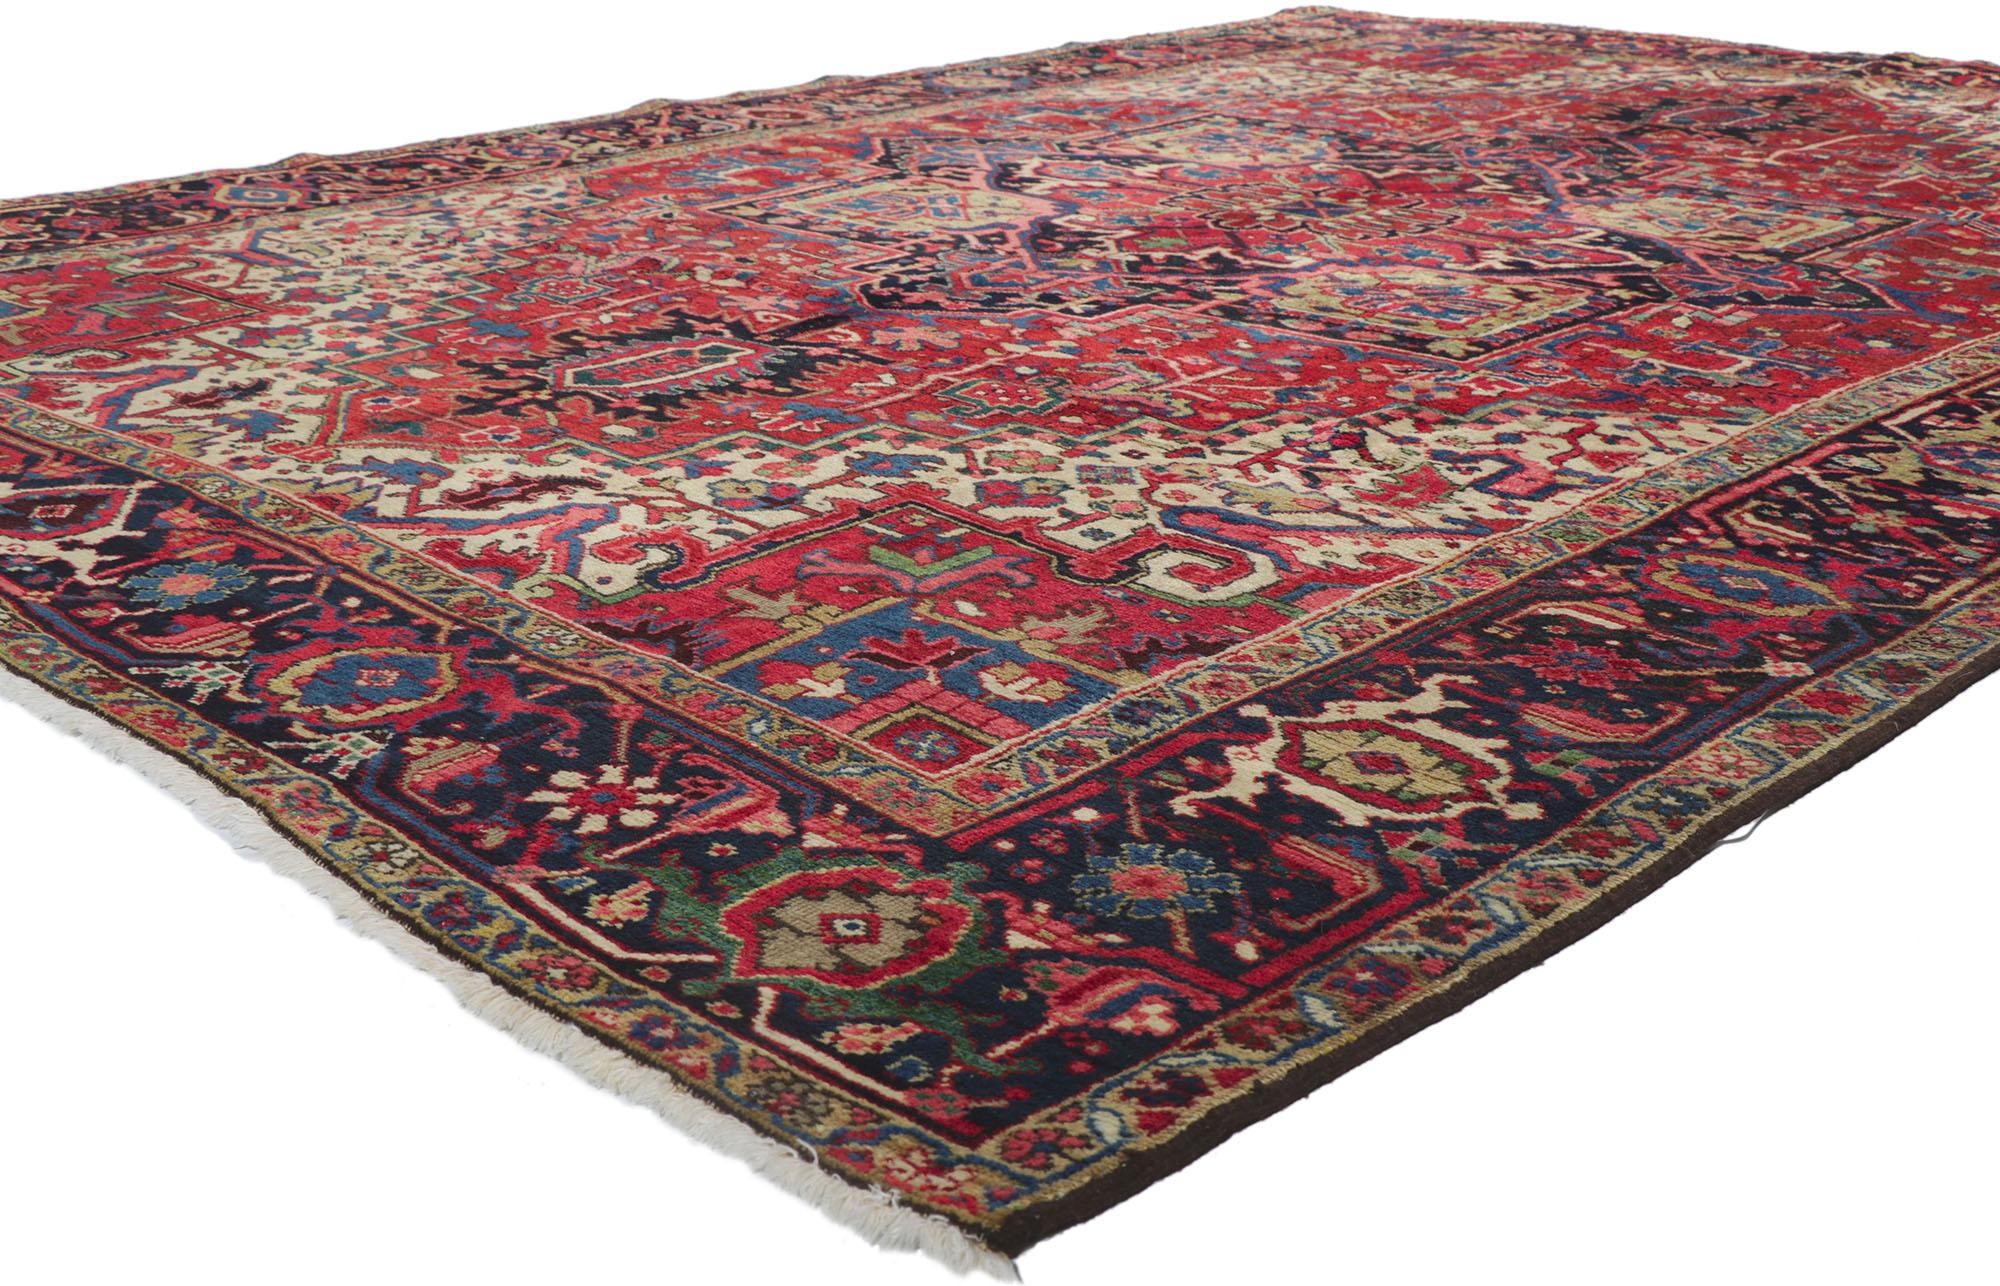 ??53776 antique Persian Heriz rug 08'01 x 11'00. ?With its effortless beauty and timeless appeal, this hand knotted wool antique Persian Heriz rug can beautifully blend modern, contemporary, and traditional interiors. Taking center stage of the